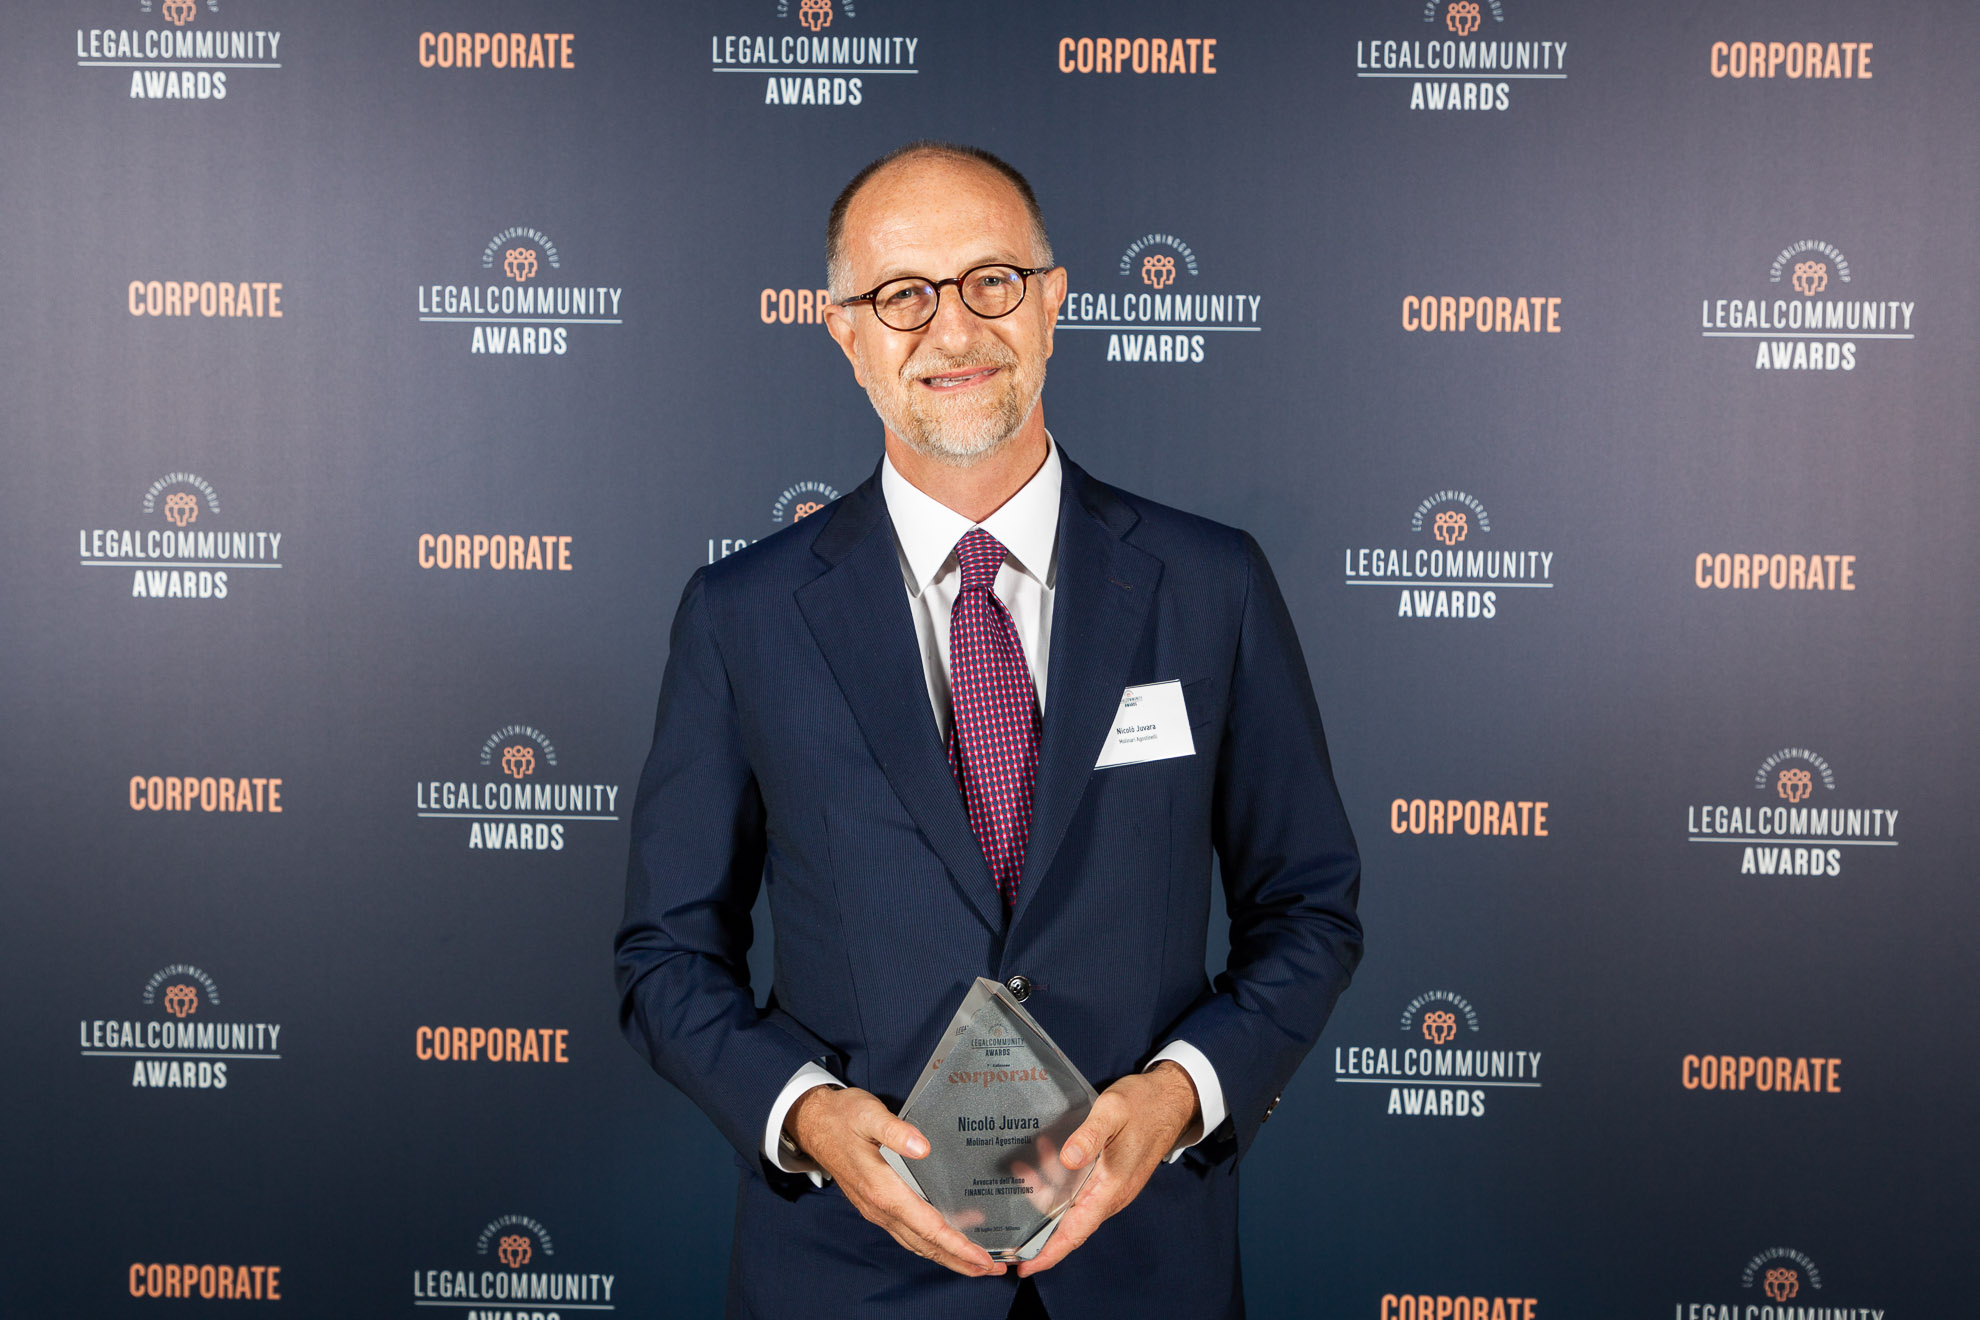 Nicolo' Juvara named Financial Institutions Lawyer of the Year at the 2021 Legalcommunity Corporate Awards